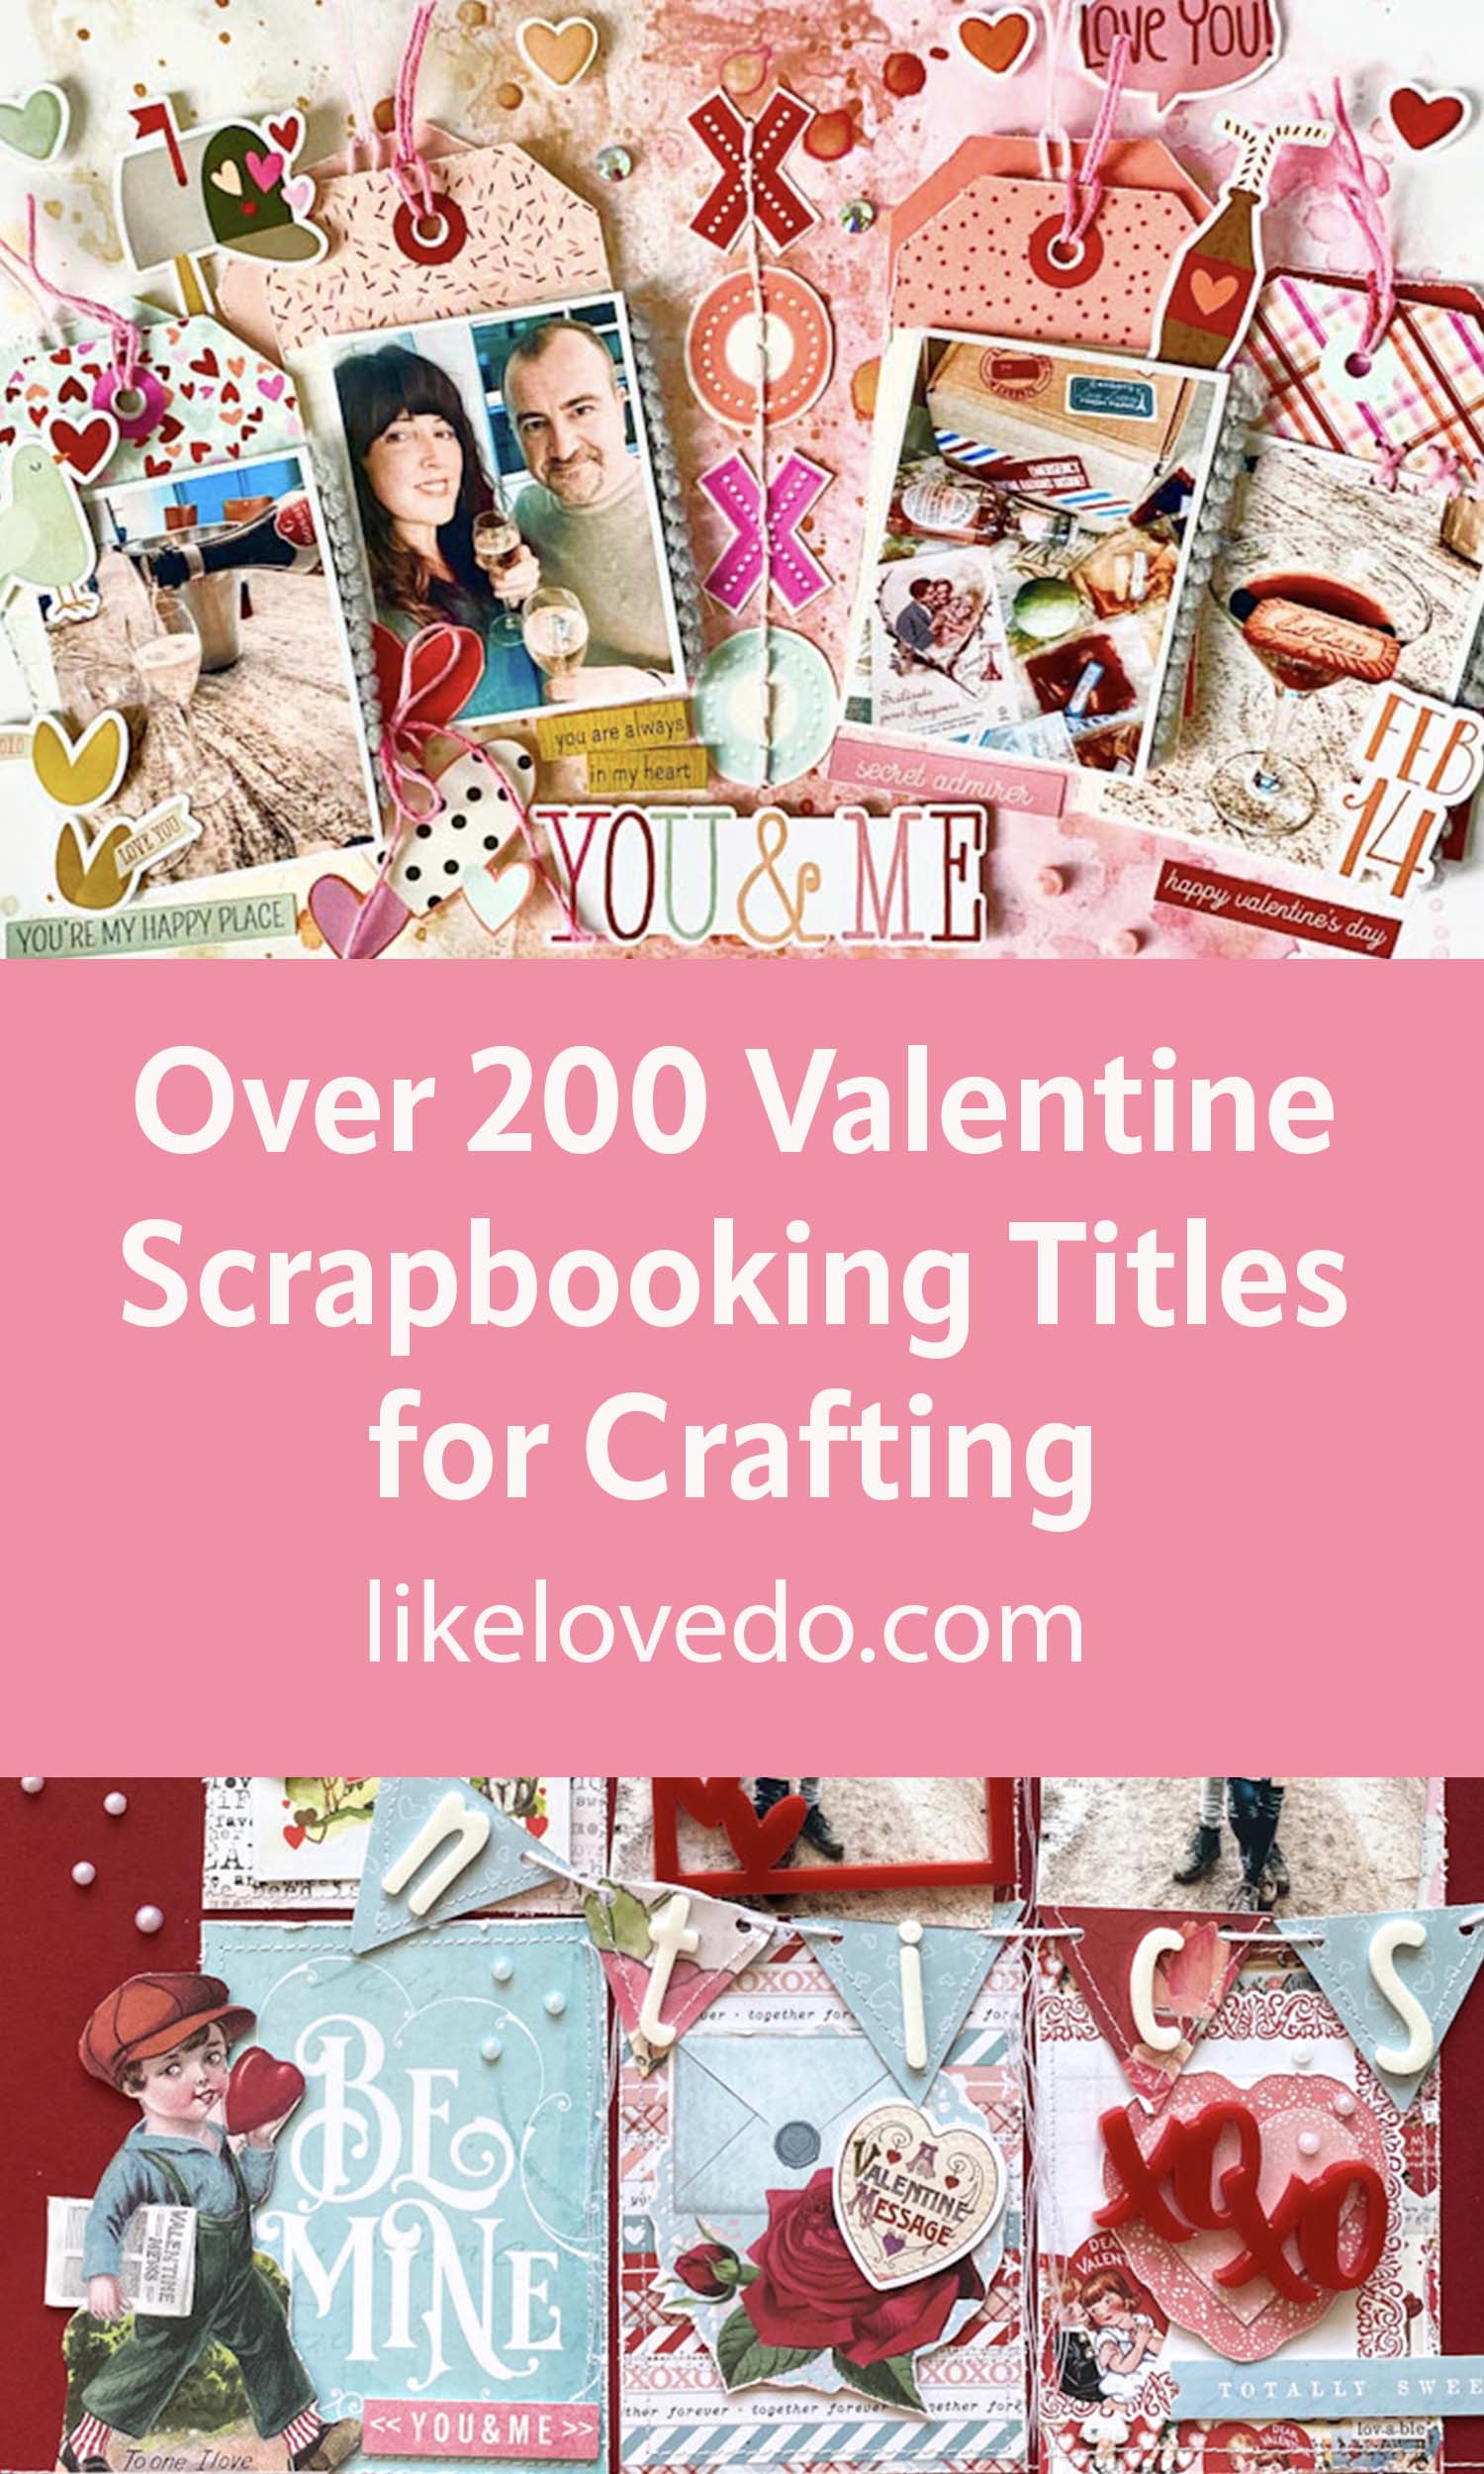 Valentines Titles for Scrapbooking